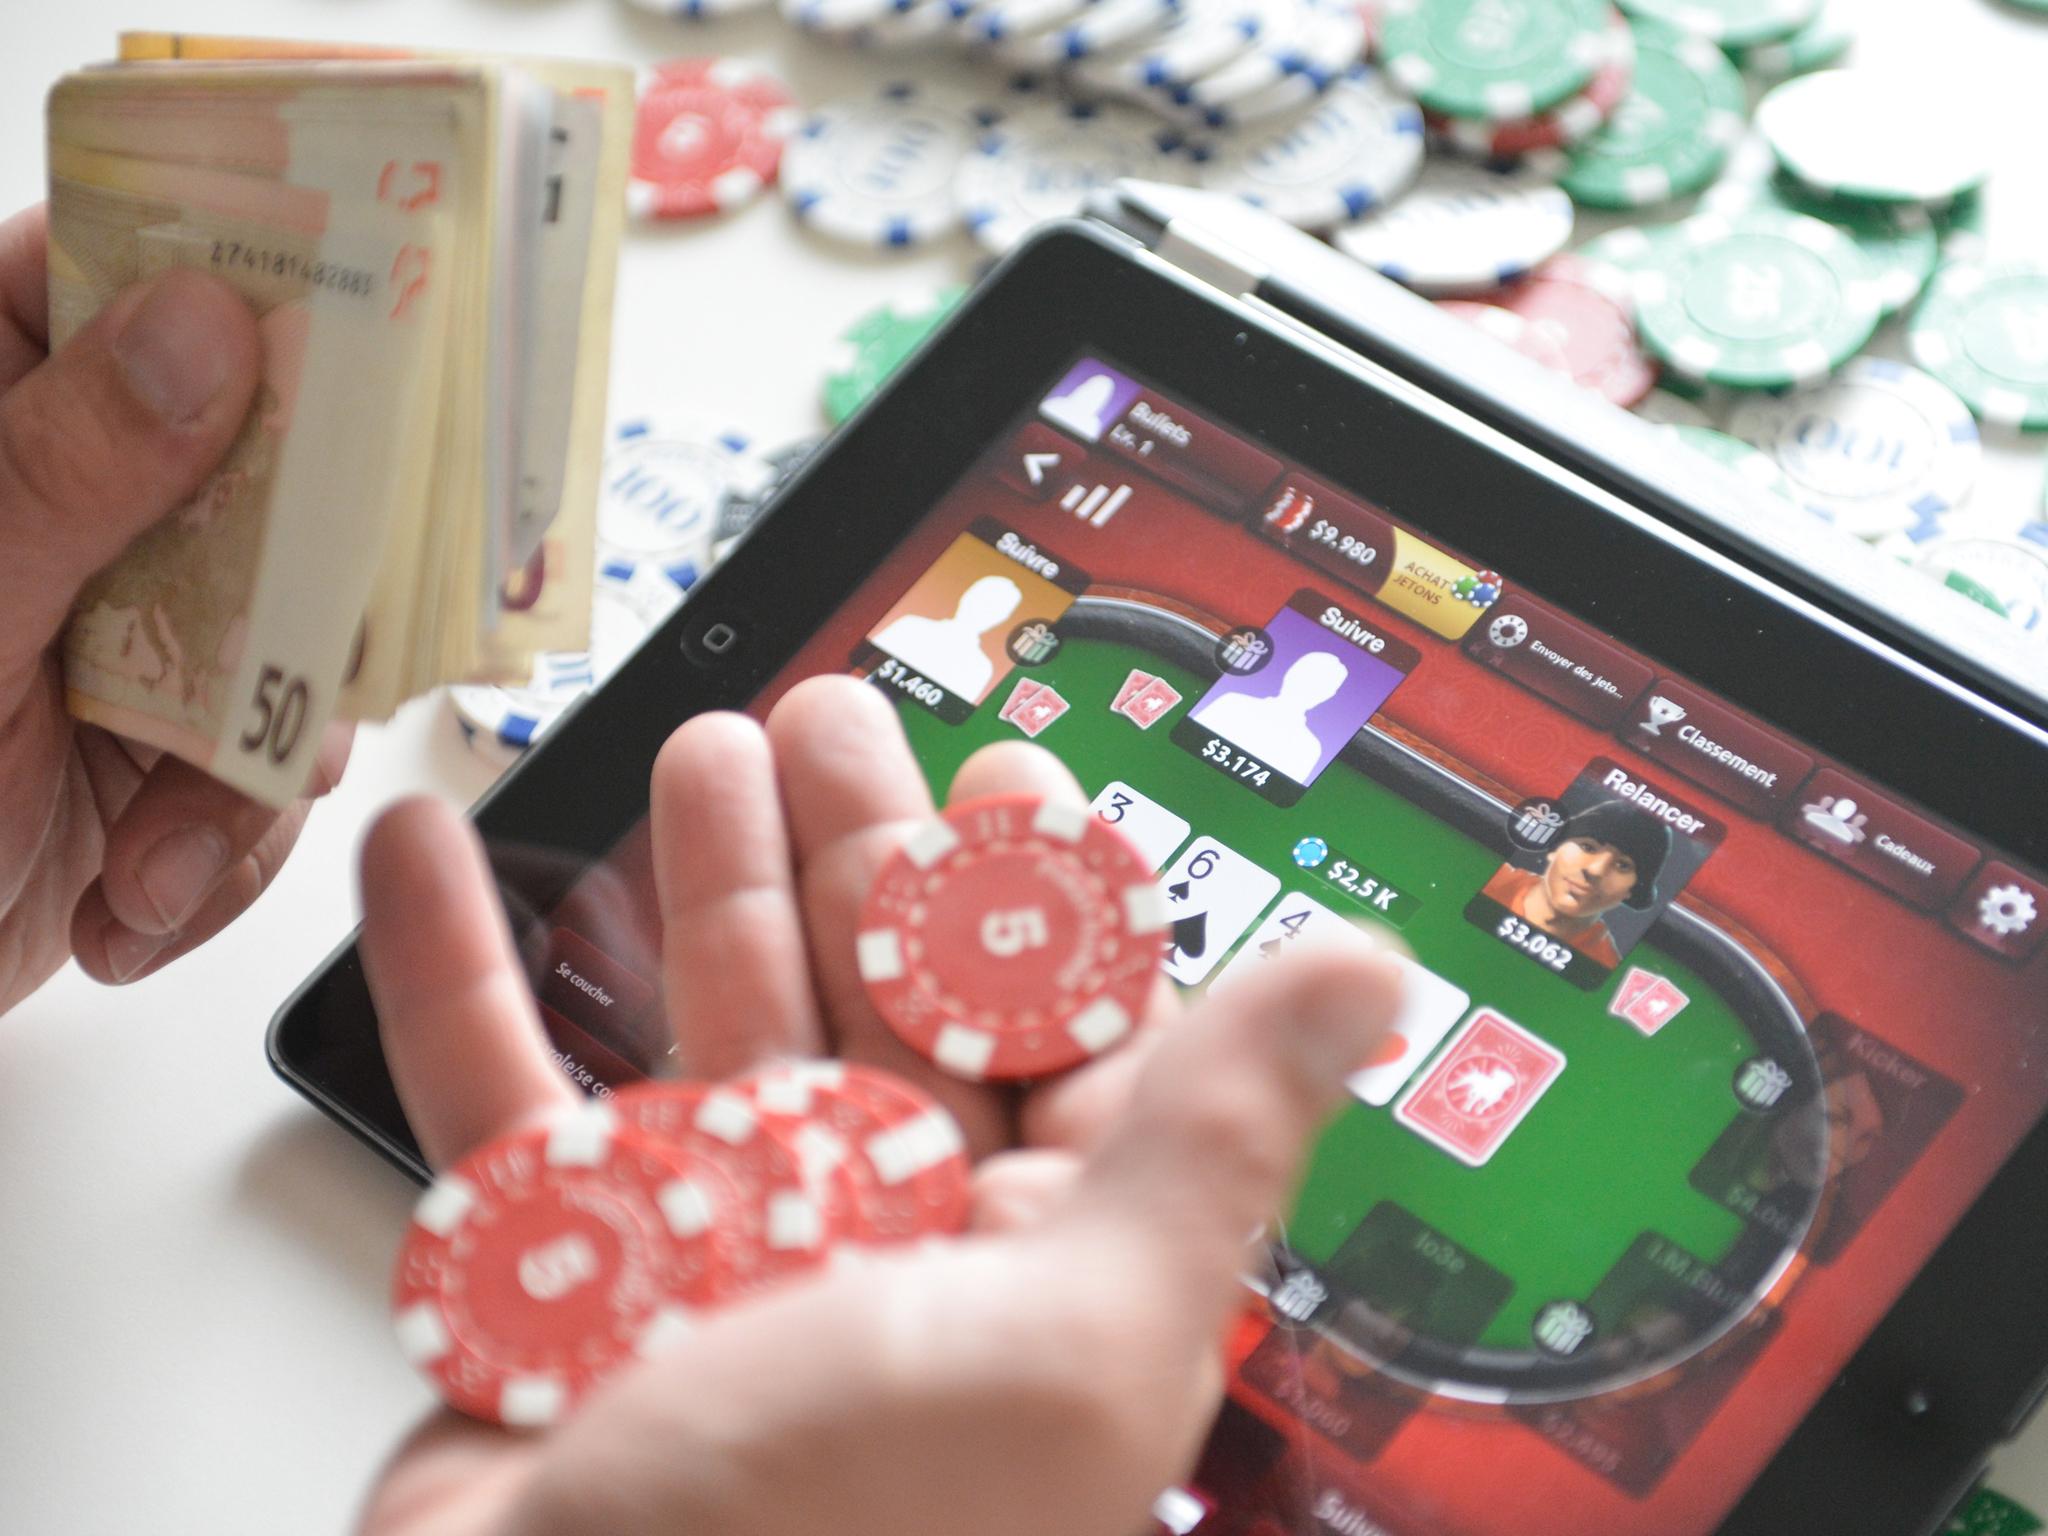 There is particular concern over adverts for online gambling